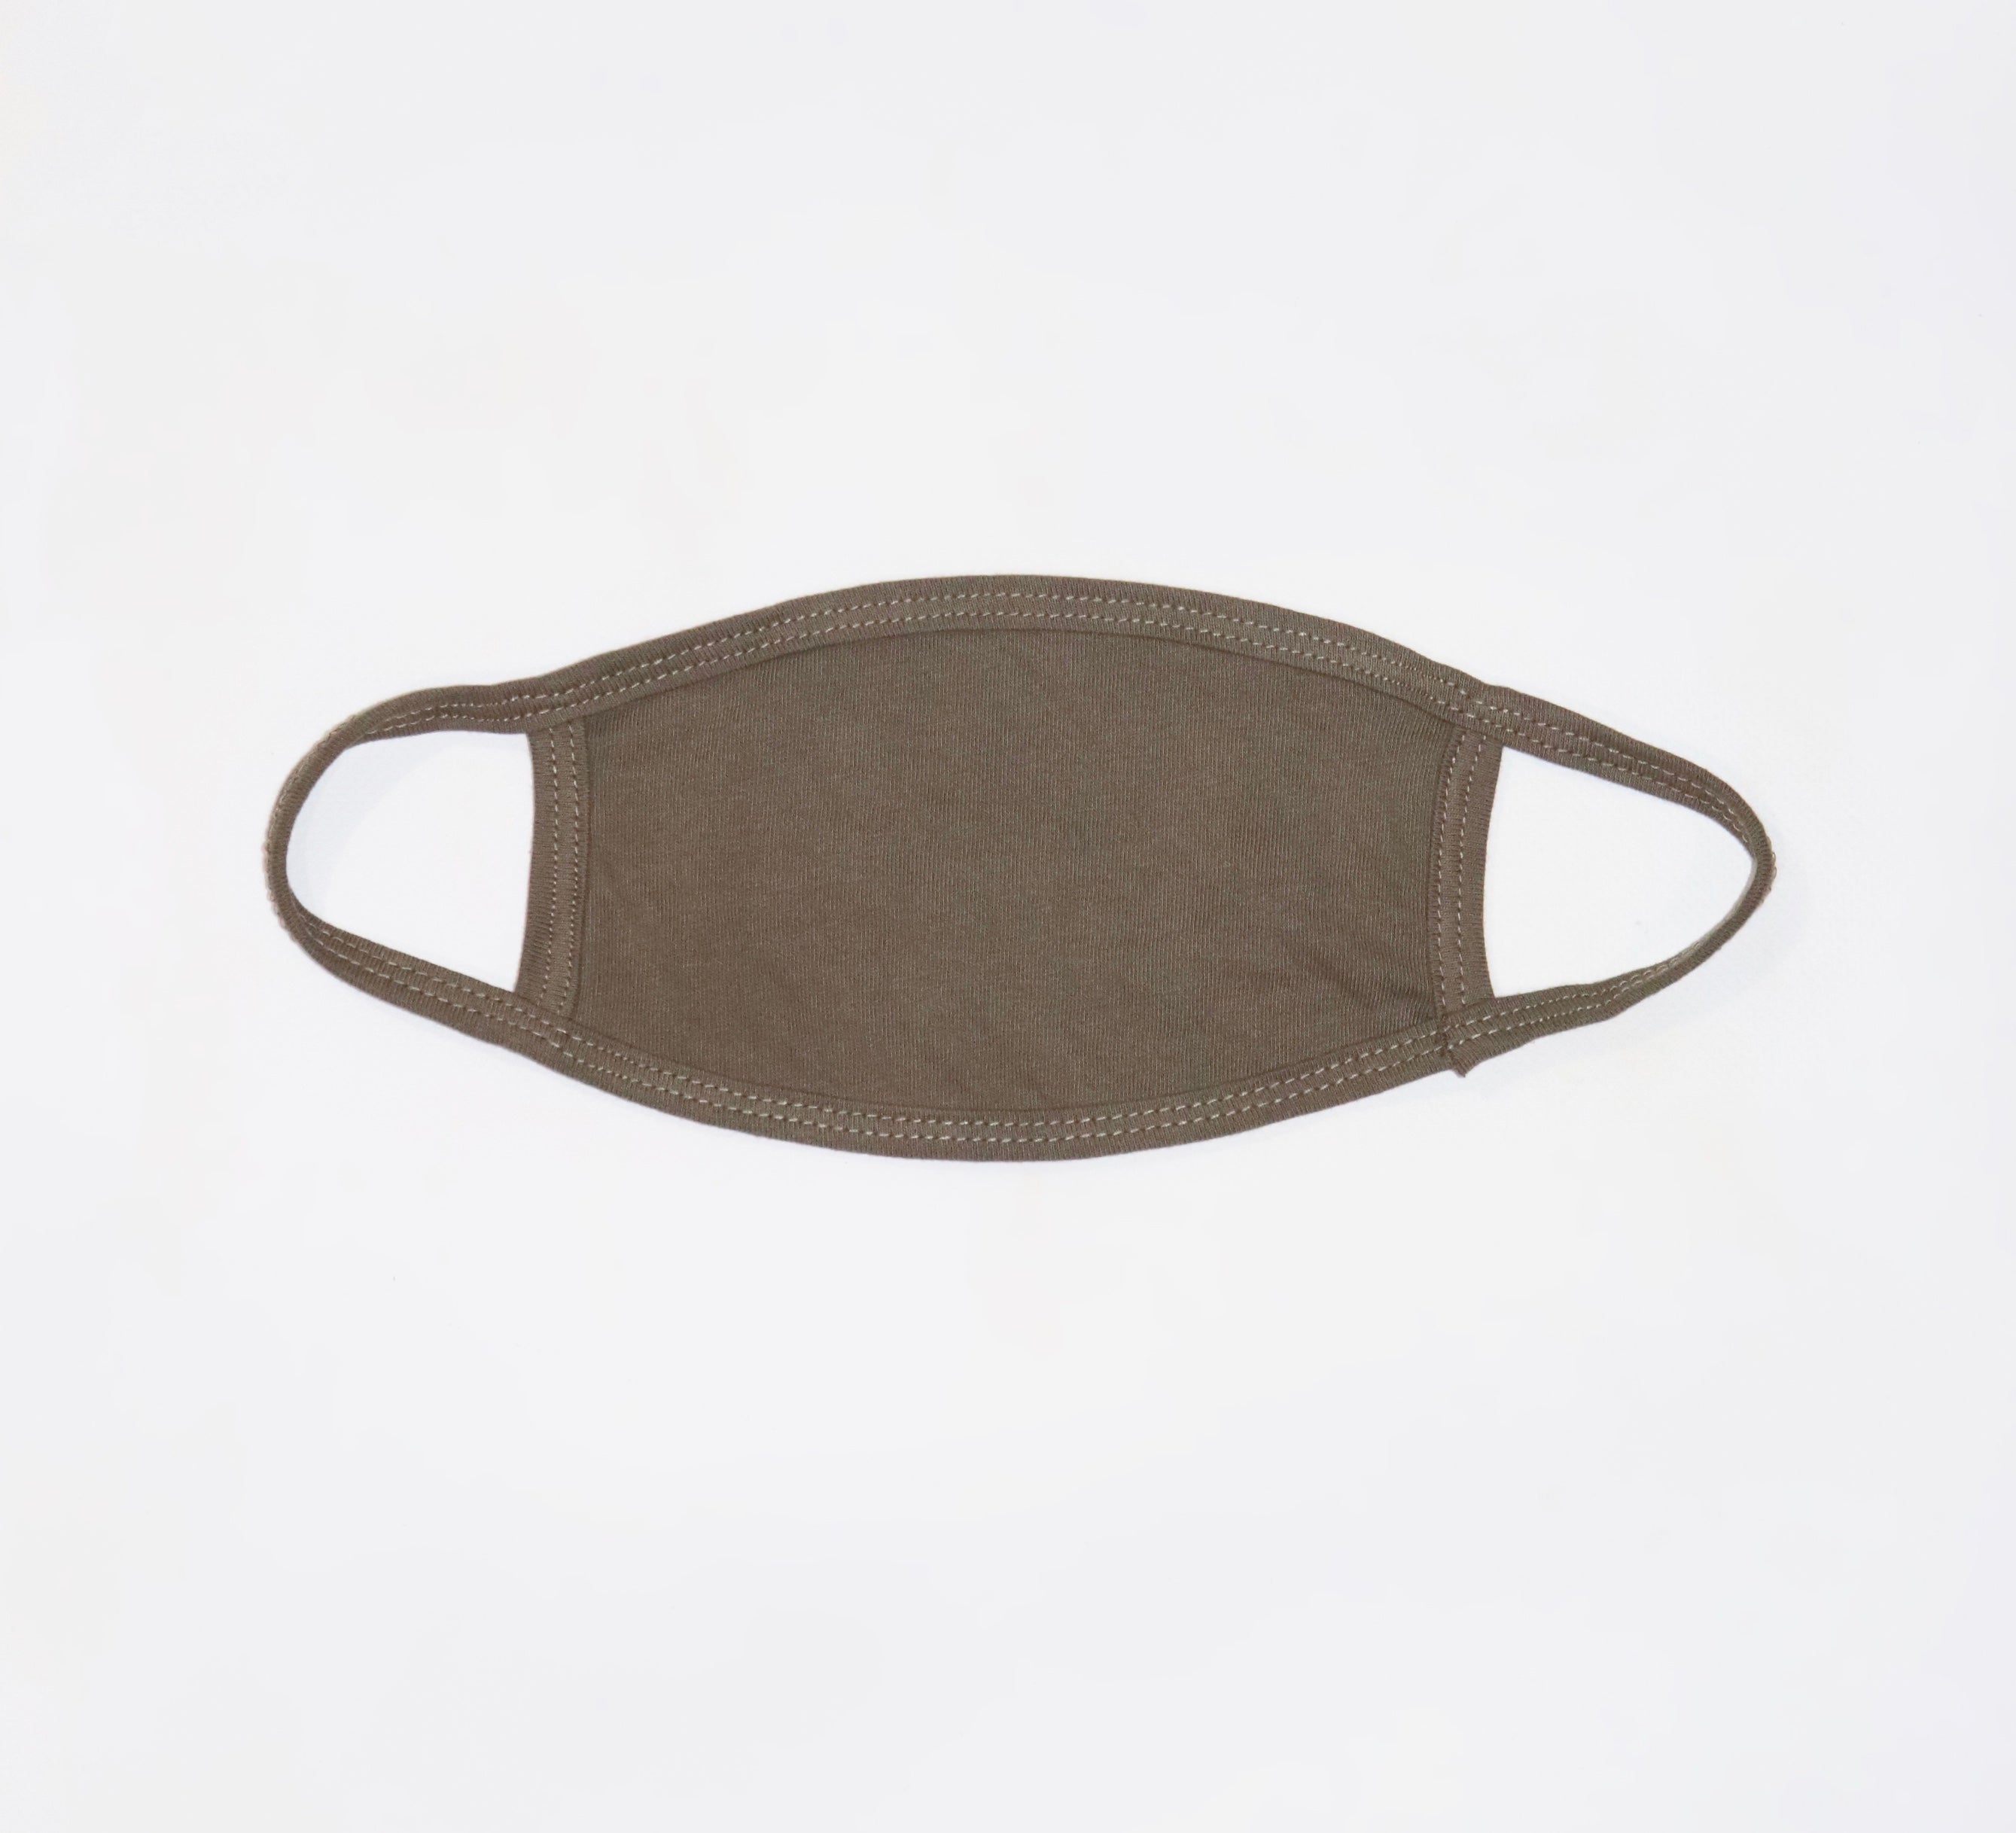 Plain Olive Green Fabric Mask- No Filter